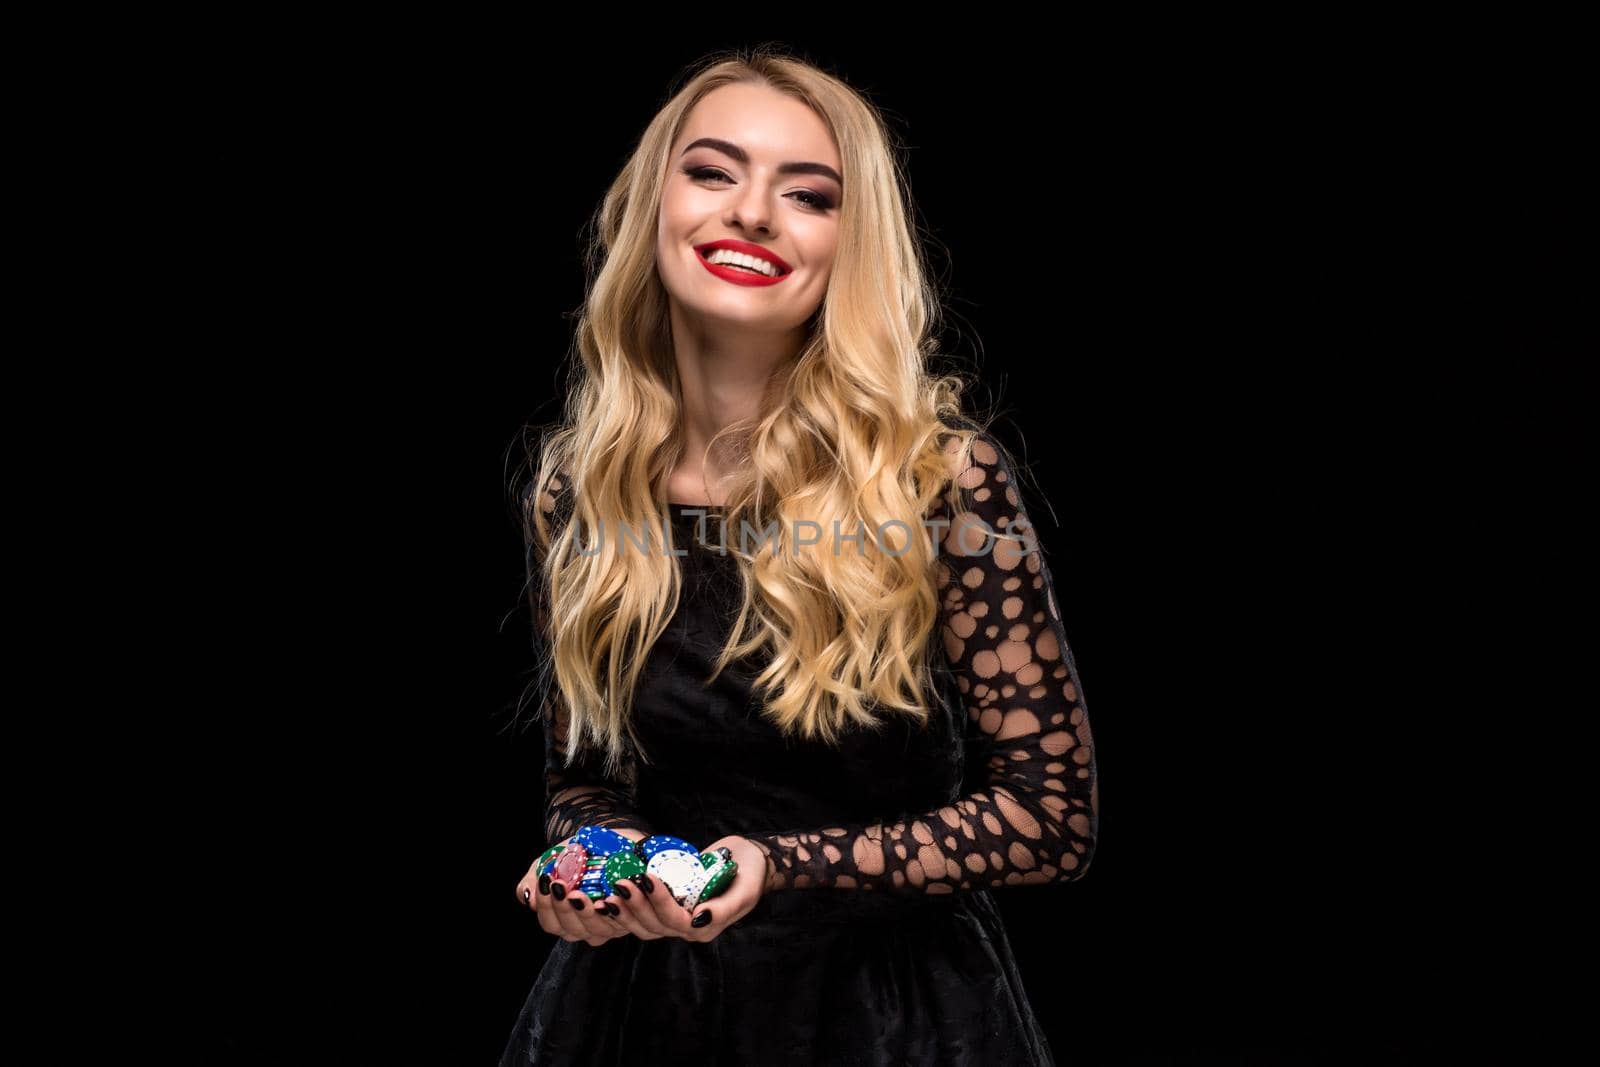 Elegant blonde in a black dress, casino player holding a handful of chips on black background. Poker. Casino. Roulette Blackjack Spin. Caucasian young woman looking at the camera emotions